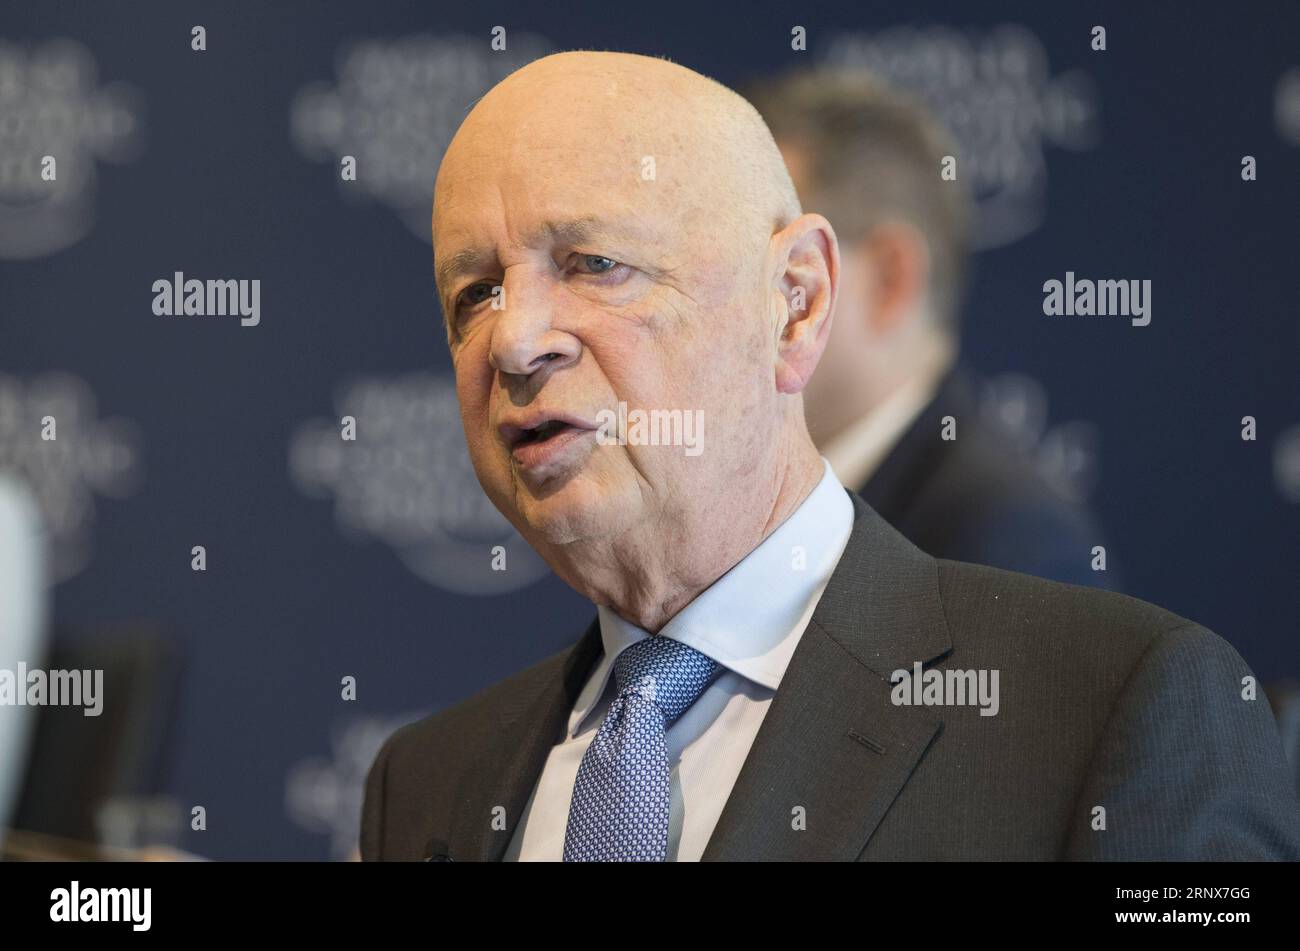 (180116) -- GENEVA, Jan. 16, 2018 -- Founder and Chief Executive of the World Economic Forum (WEF) Klaus Schwab speaks at a press conference in Geneva, Switzerland, Jan. 16, 2018. Some 70 heads of state and government and 38 heads of international organizations will debate creating a shared future in a fractured world -- the theme of this year s World Economic Forum in Davos from Jan. 23 to Jan. 26. ) SWITZERLAND-GENEVA-WORLD ECONOMIC FORUM-PRESS CONFERENCE XuxJinquan PUBLICATIONxNOTxINxCHN Stock Photo